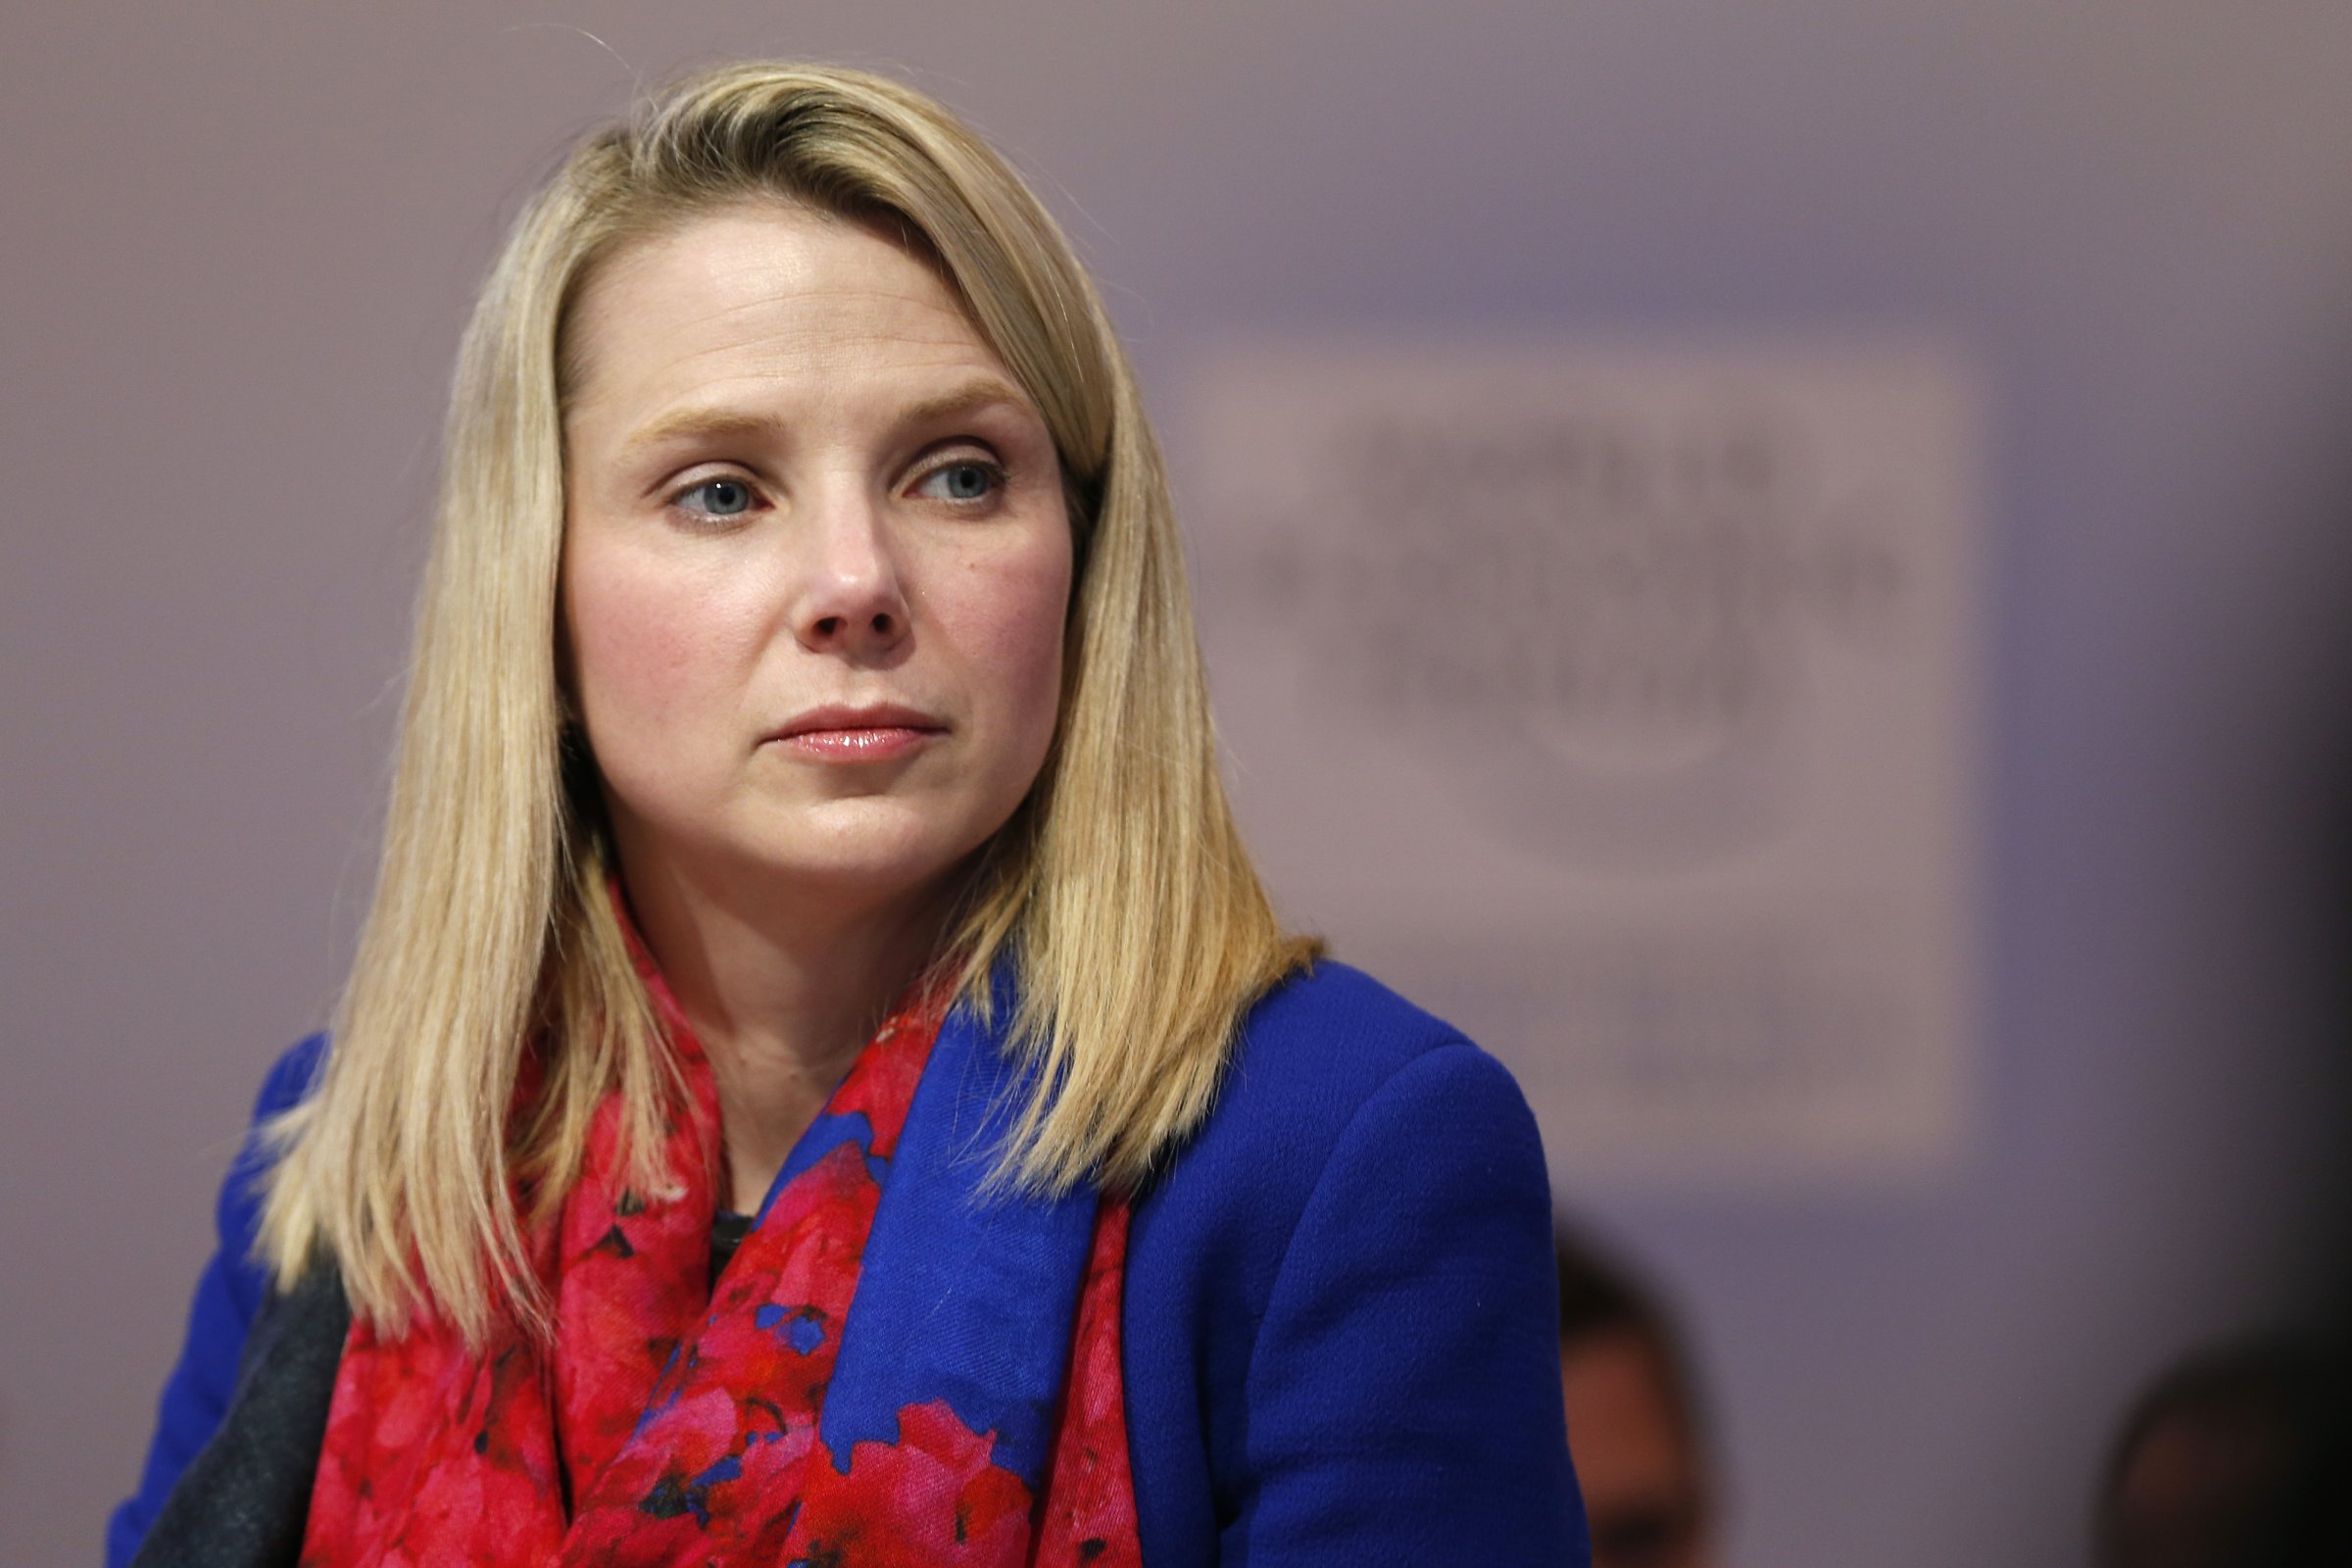 Marissa Mayer, chief executive officer of Yahoo! Inc., pauses during a session on day two of the World Economic Forum (WEF) in Davos, Switzerland, on Thursday, Jan. 22, 2015.